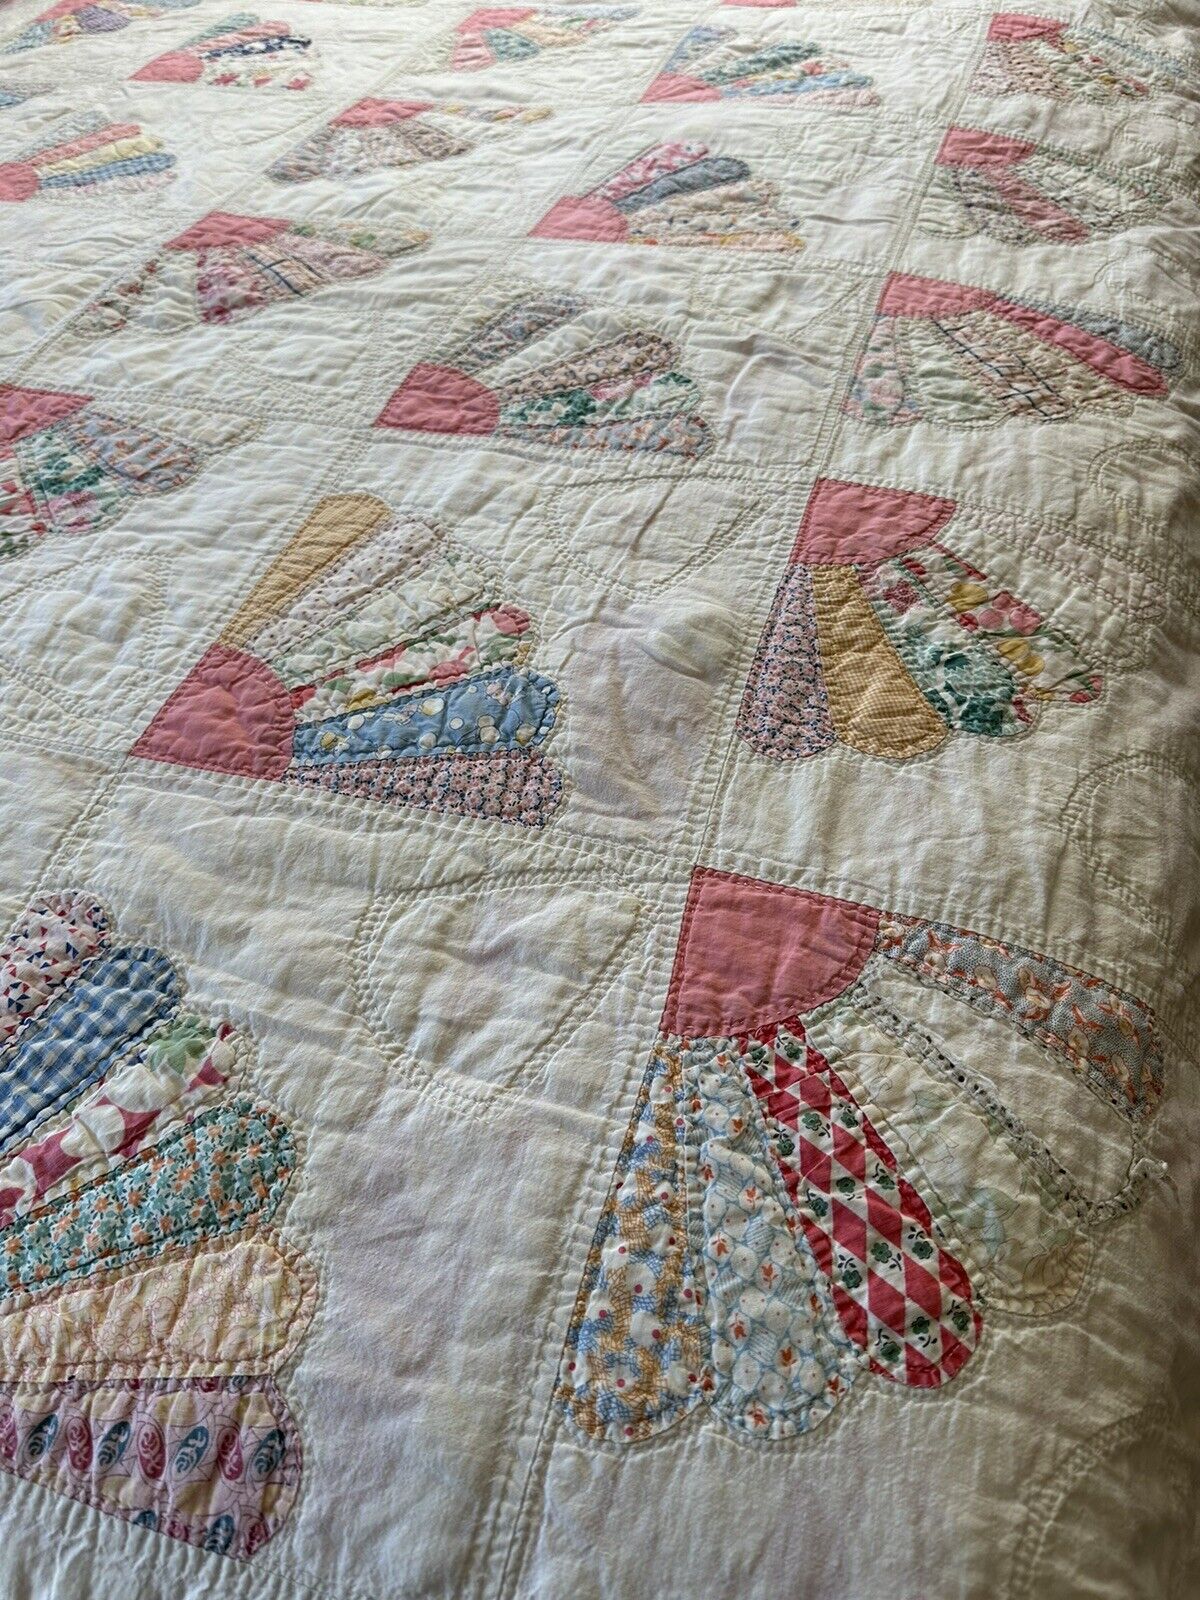 Antique Quilt Hand Stitched Grandmothers Fan Feedsack 81x72 Cotton Scalloped